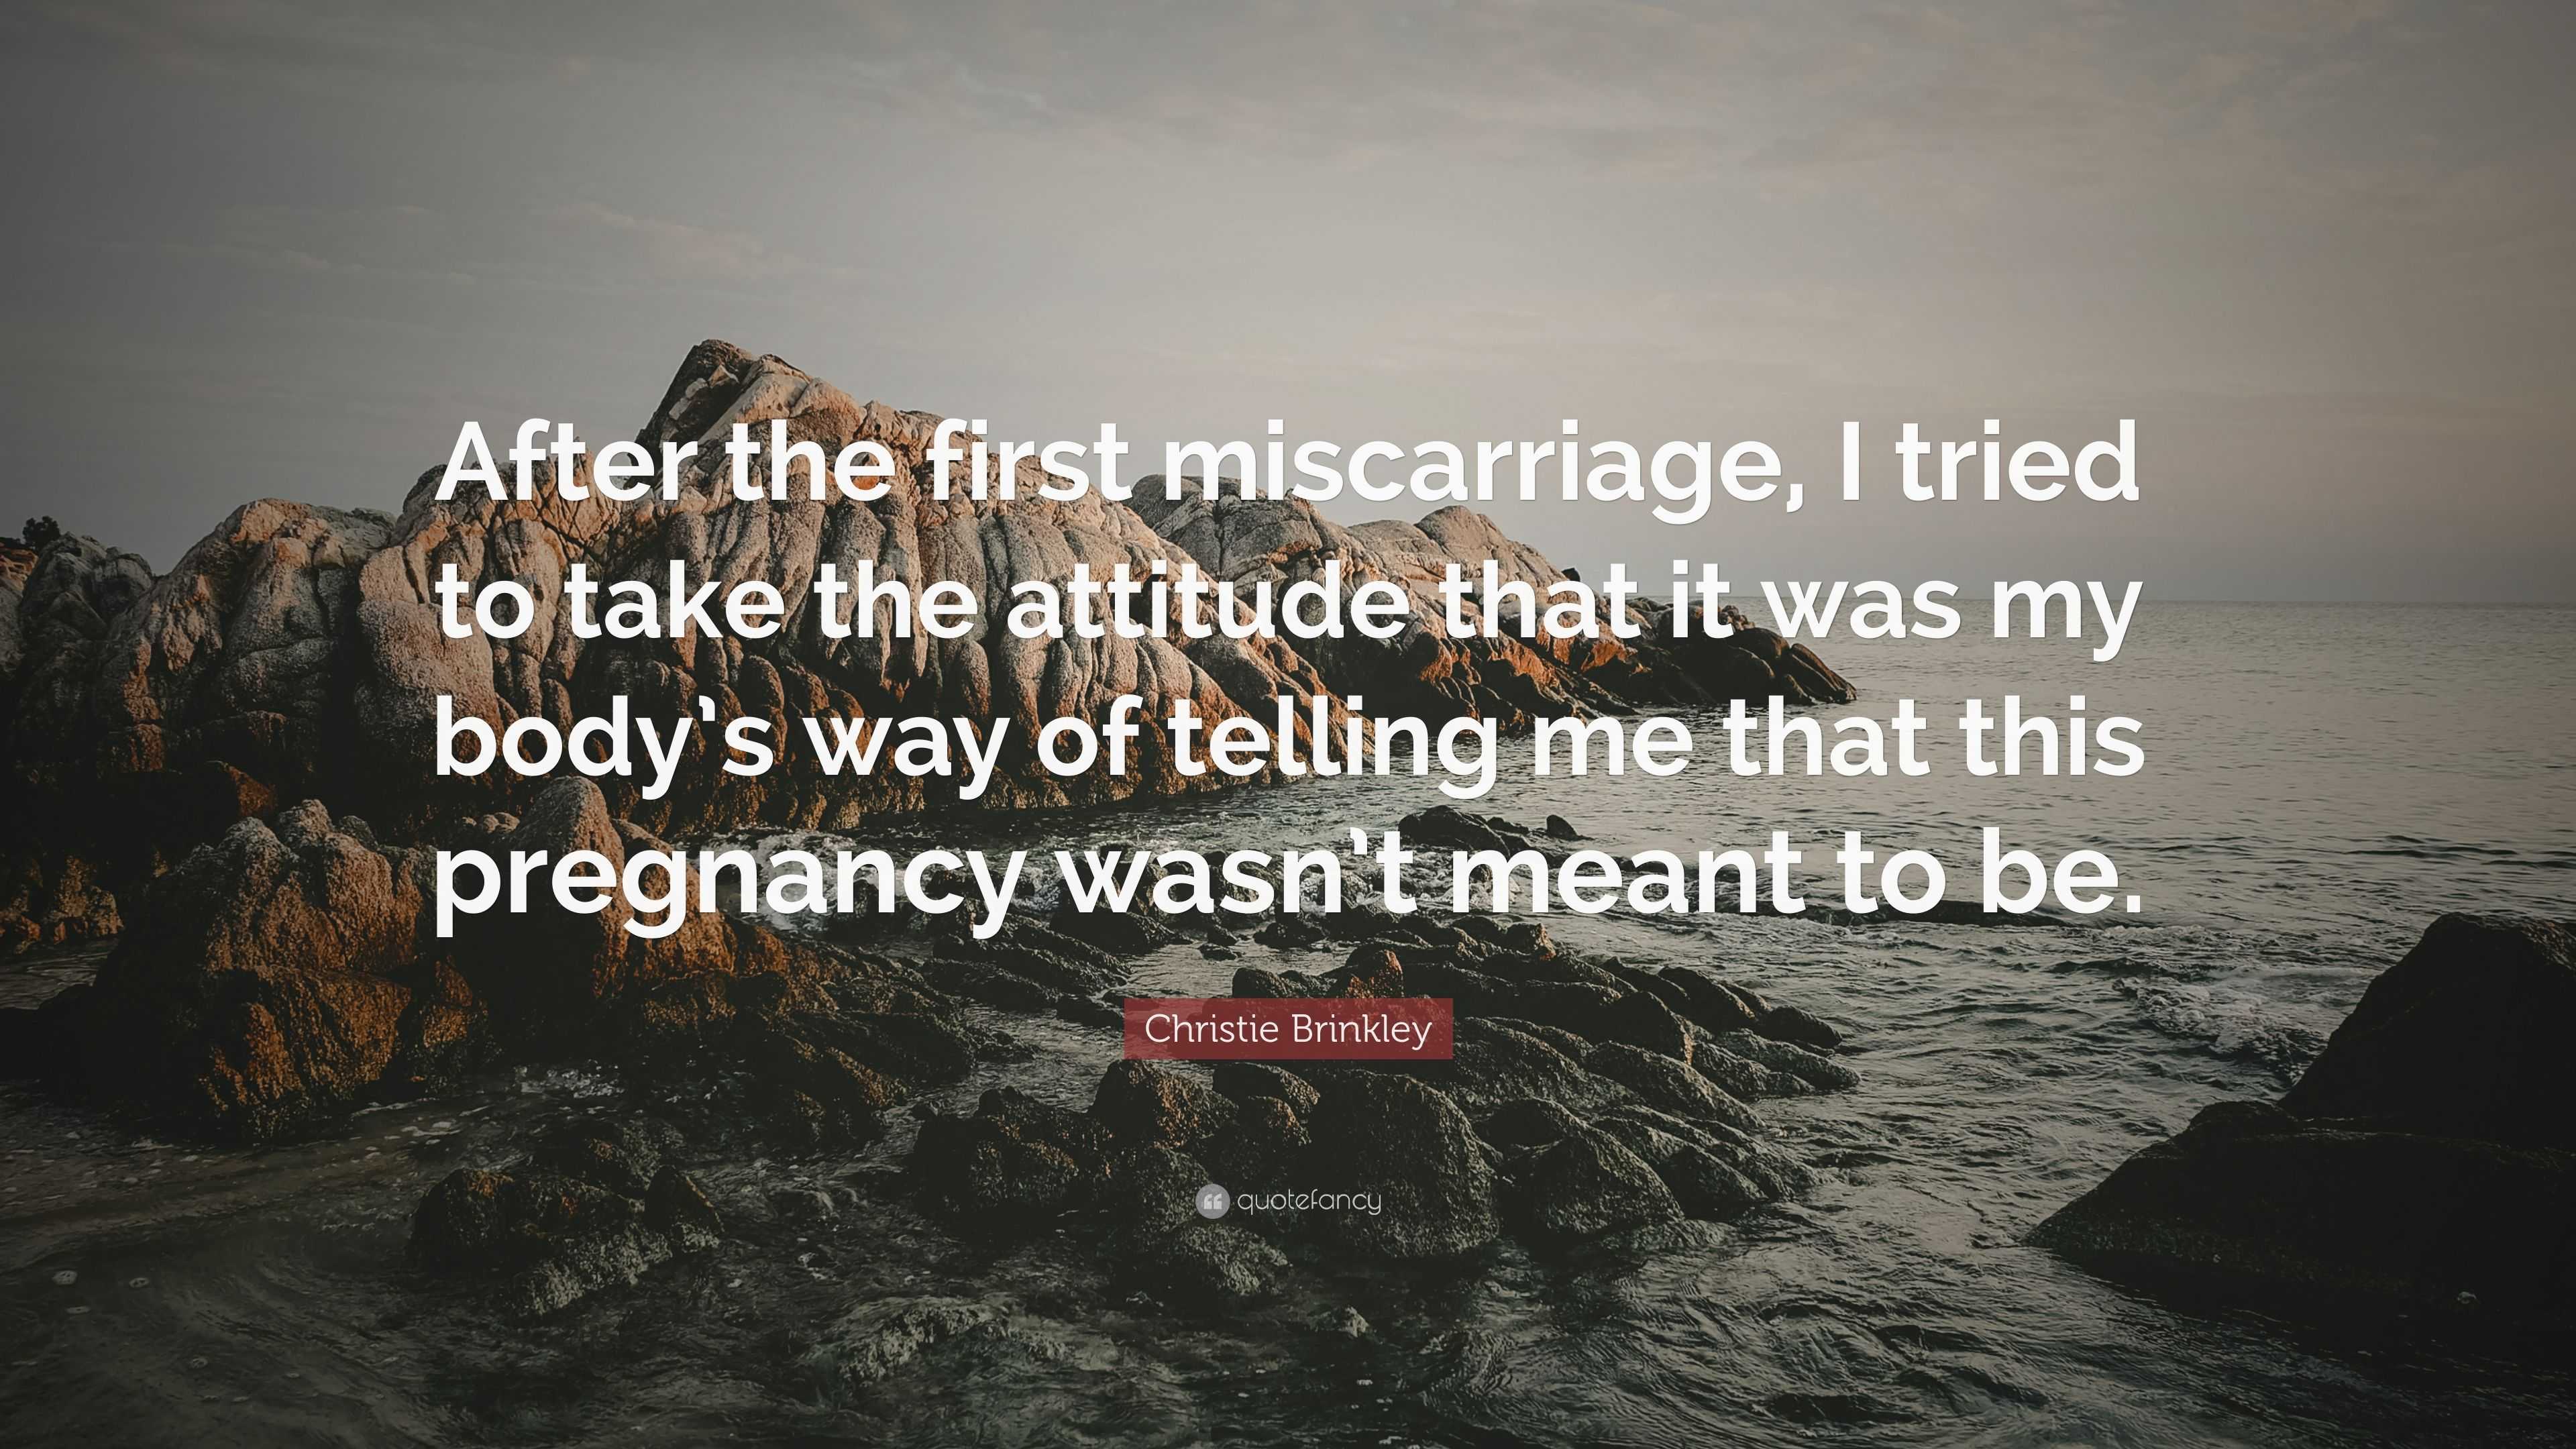 Christie Brinkley Quote: “After the first miscarriage, I tried to take ...